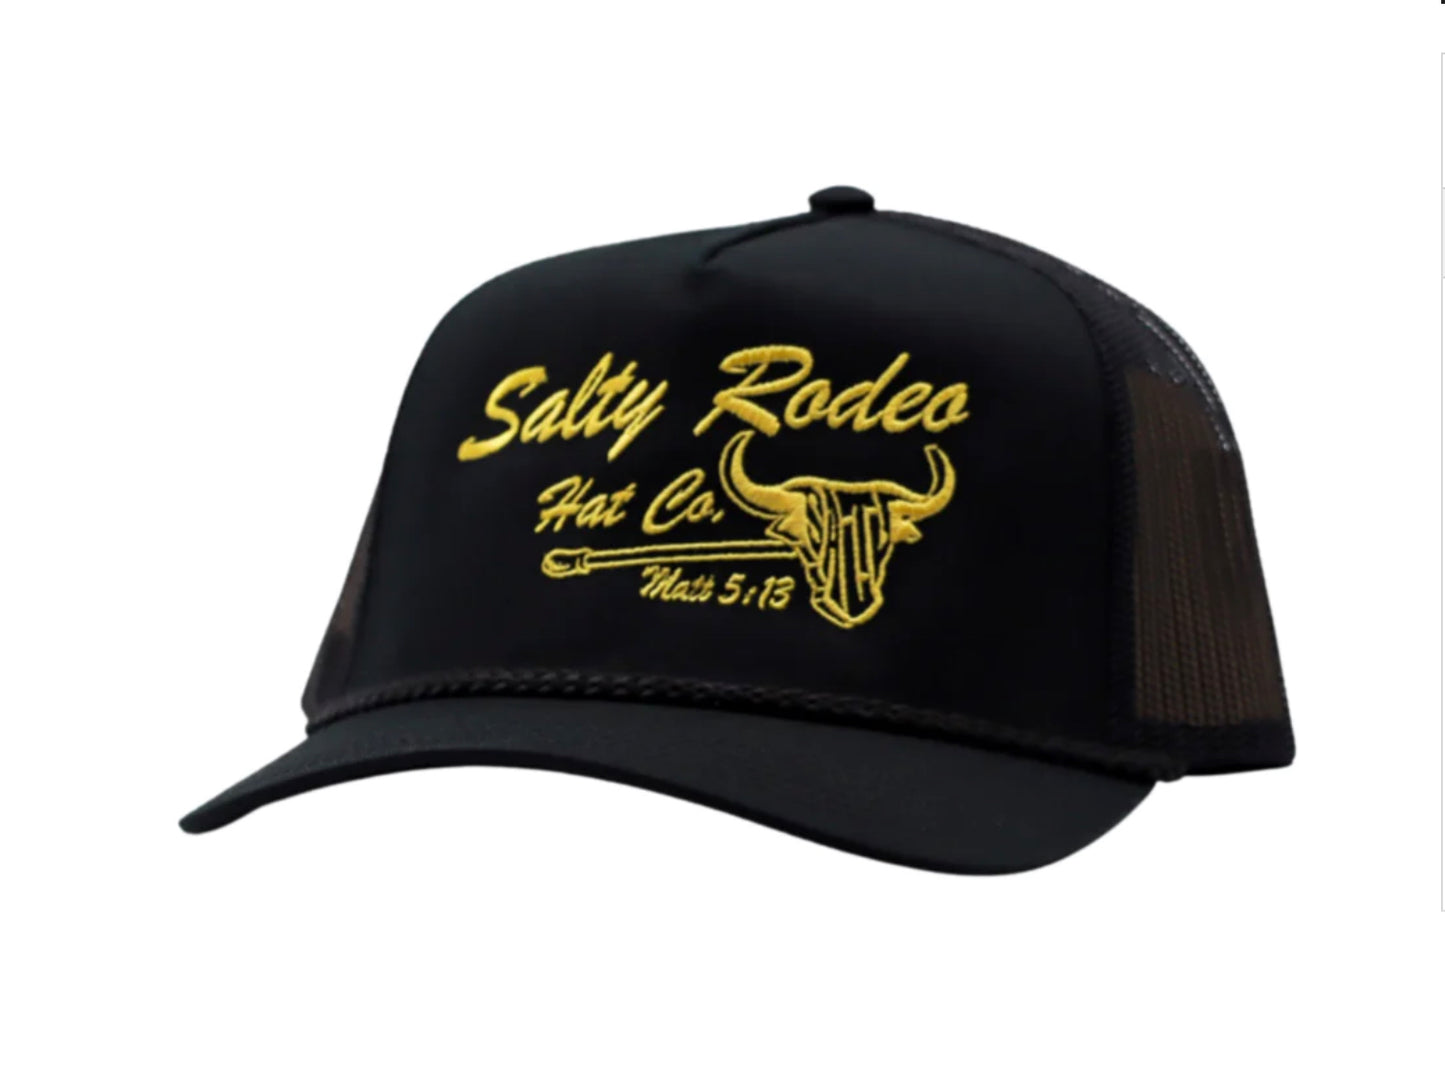 SALTY RODEO COMPANY THE BRAND CAP